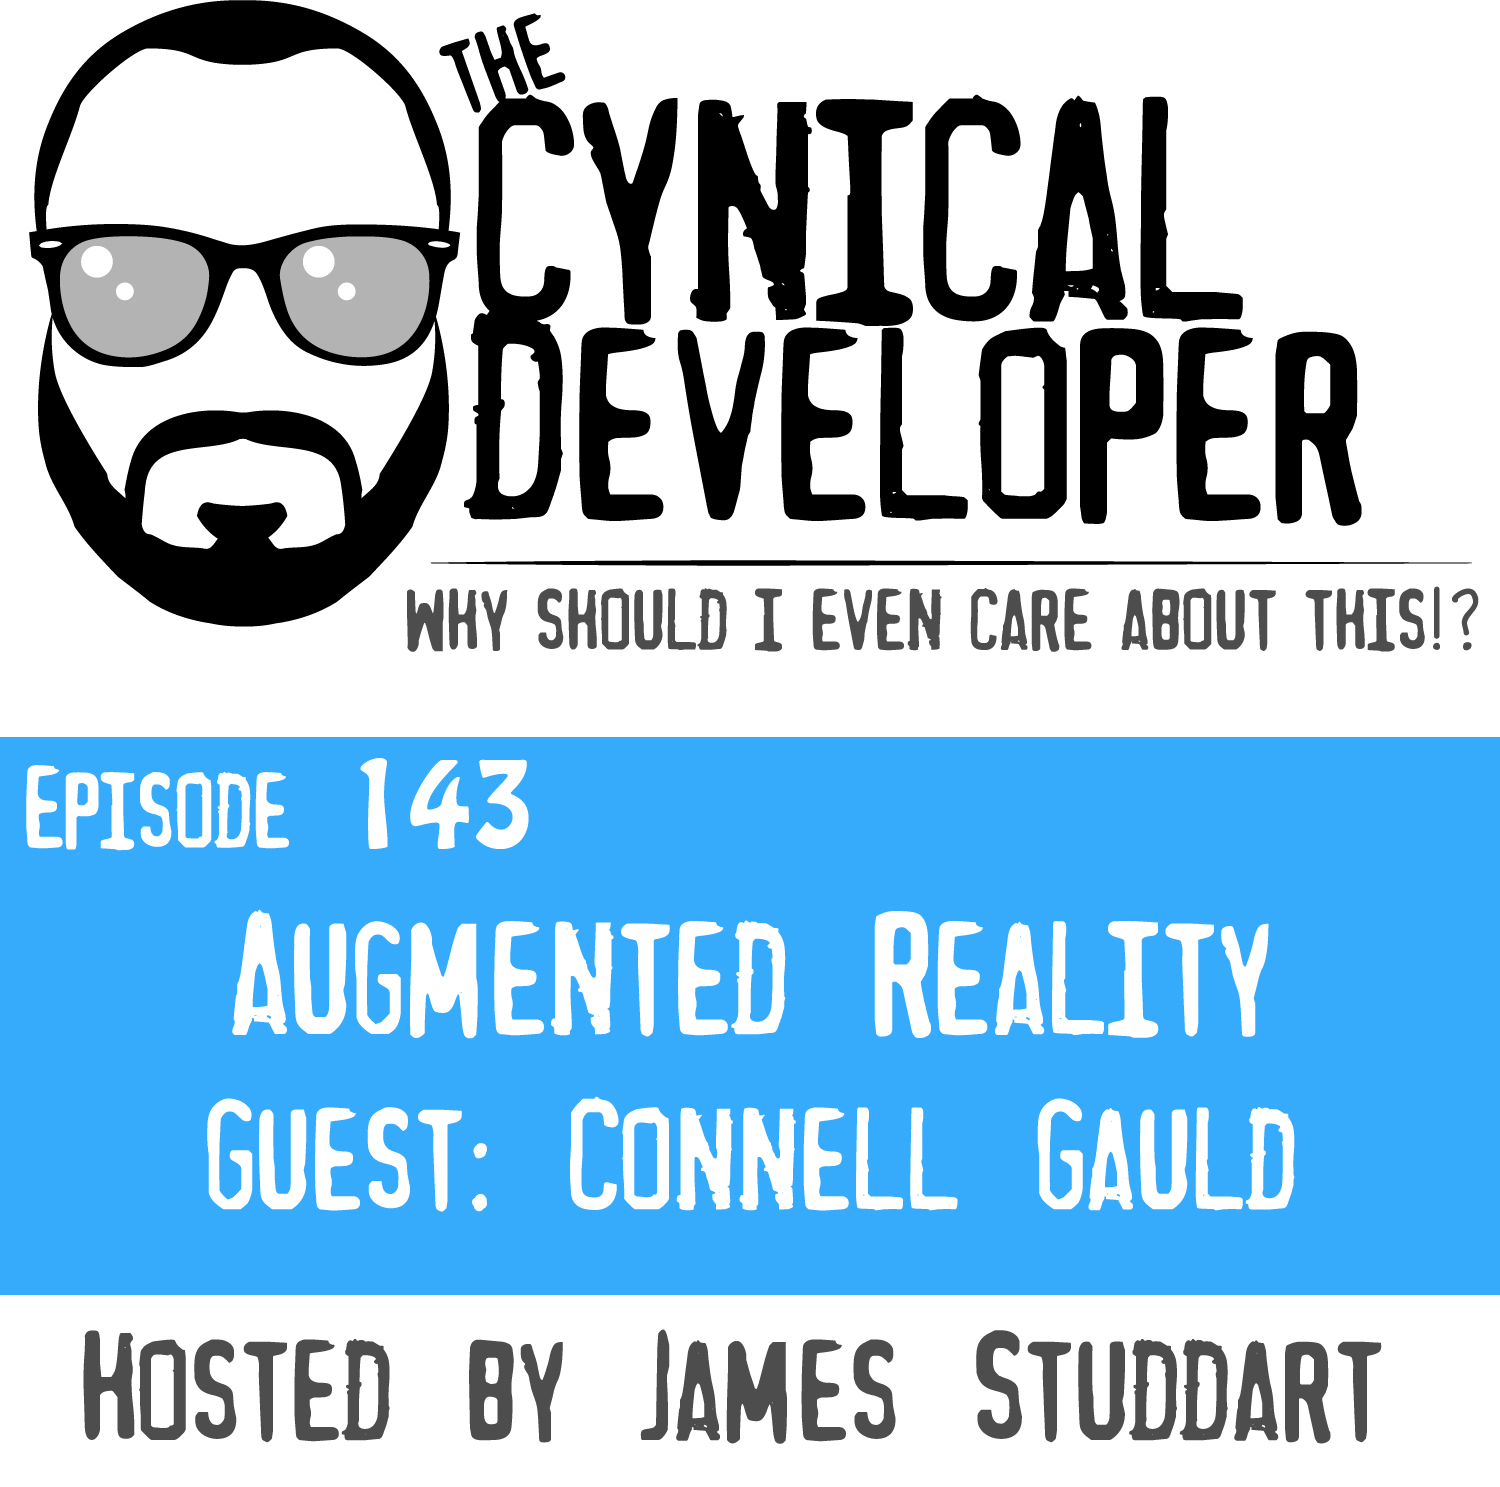 Episode 143 - Augmented Reality